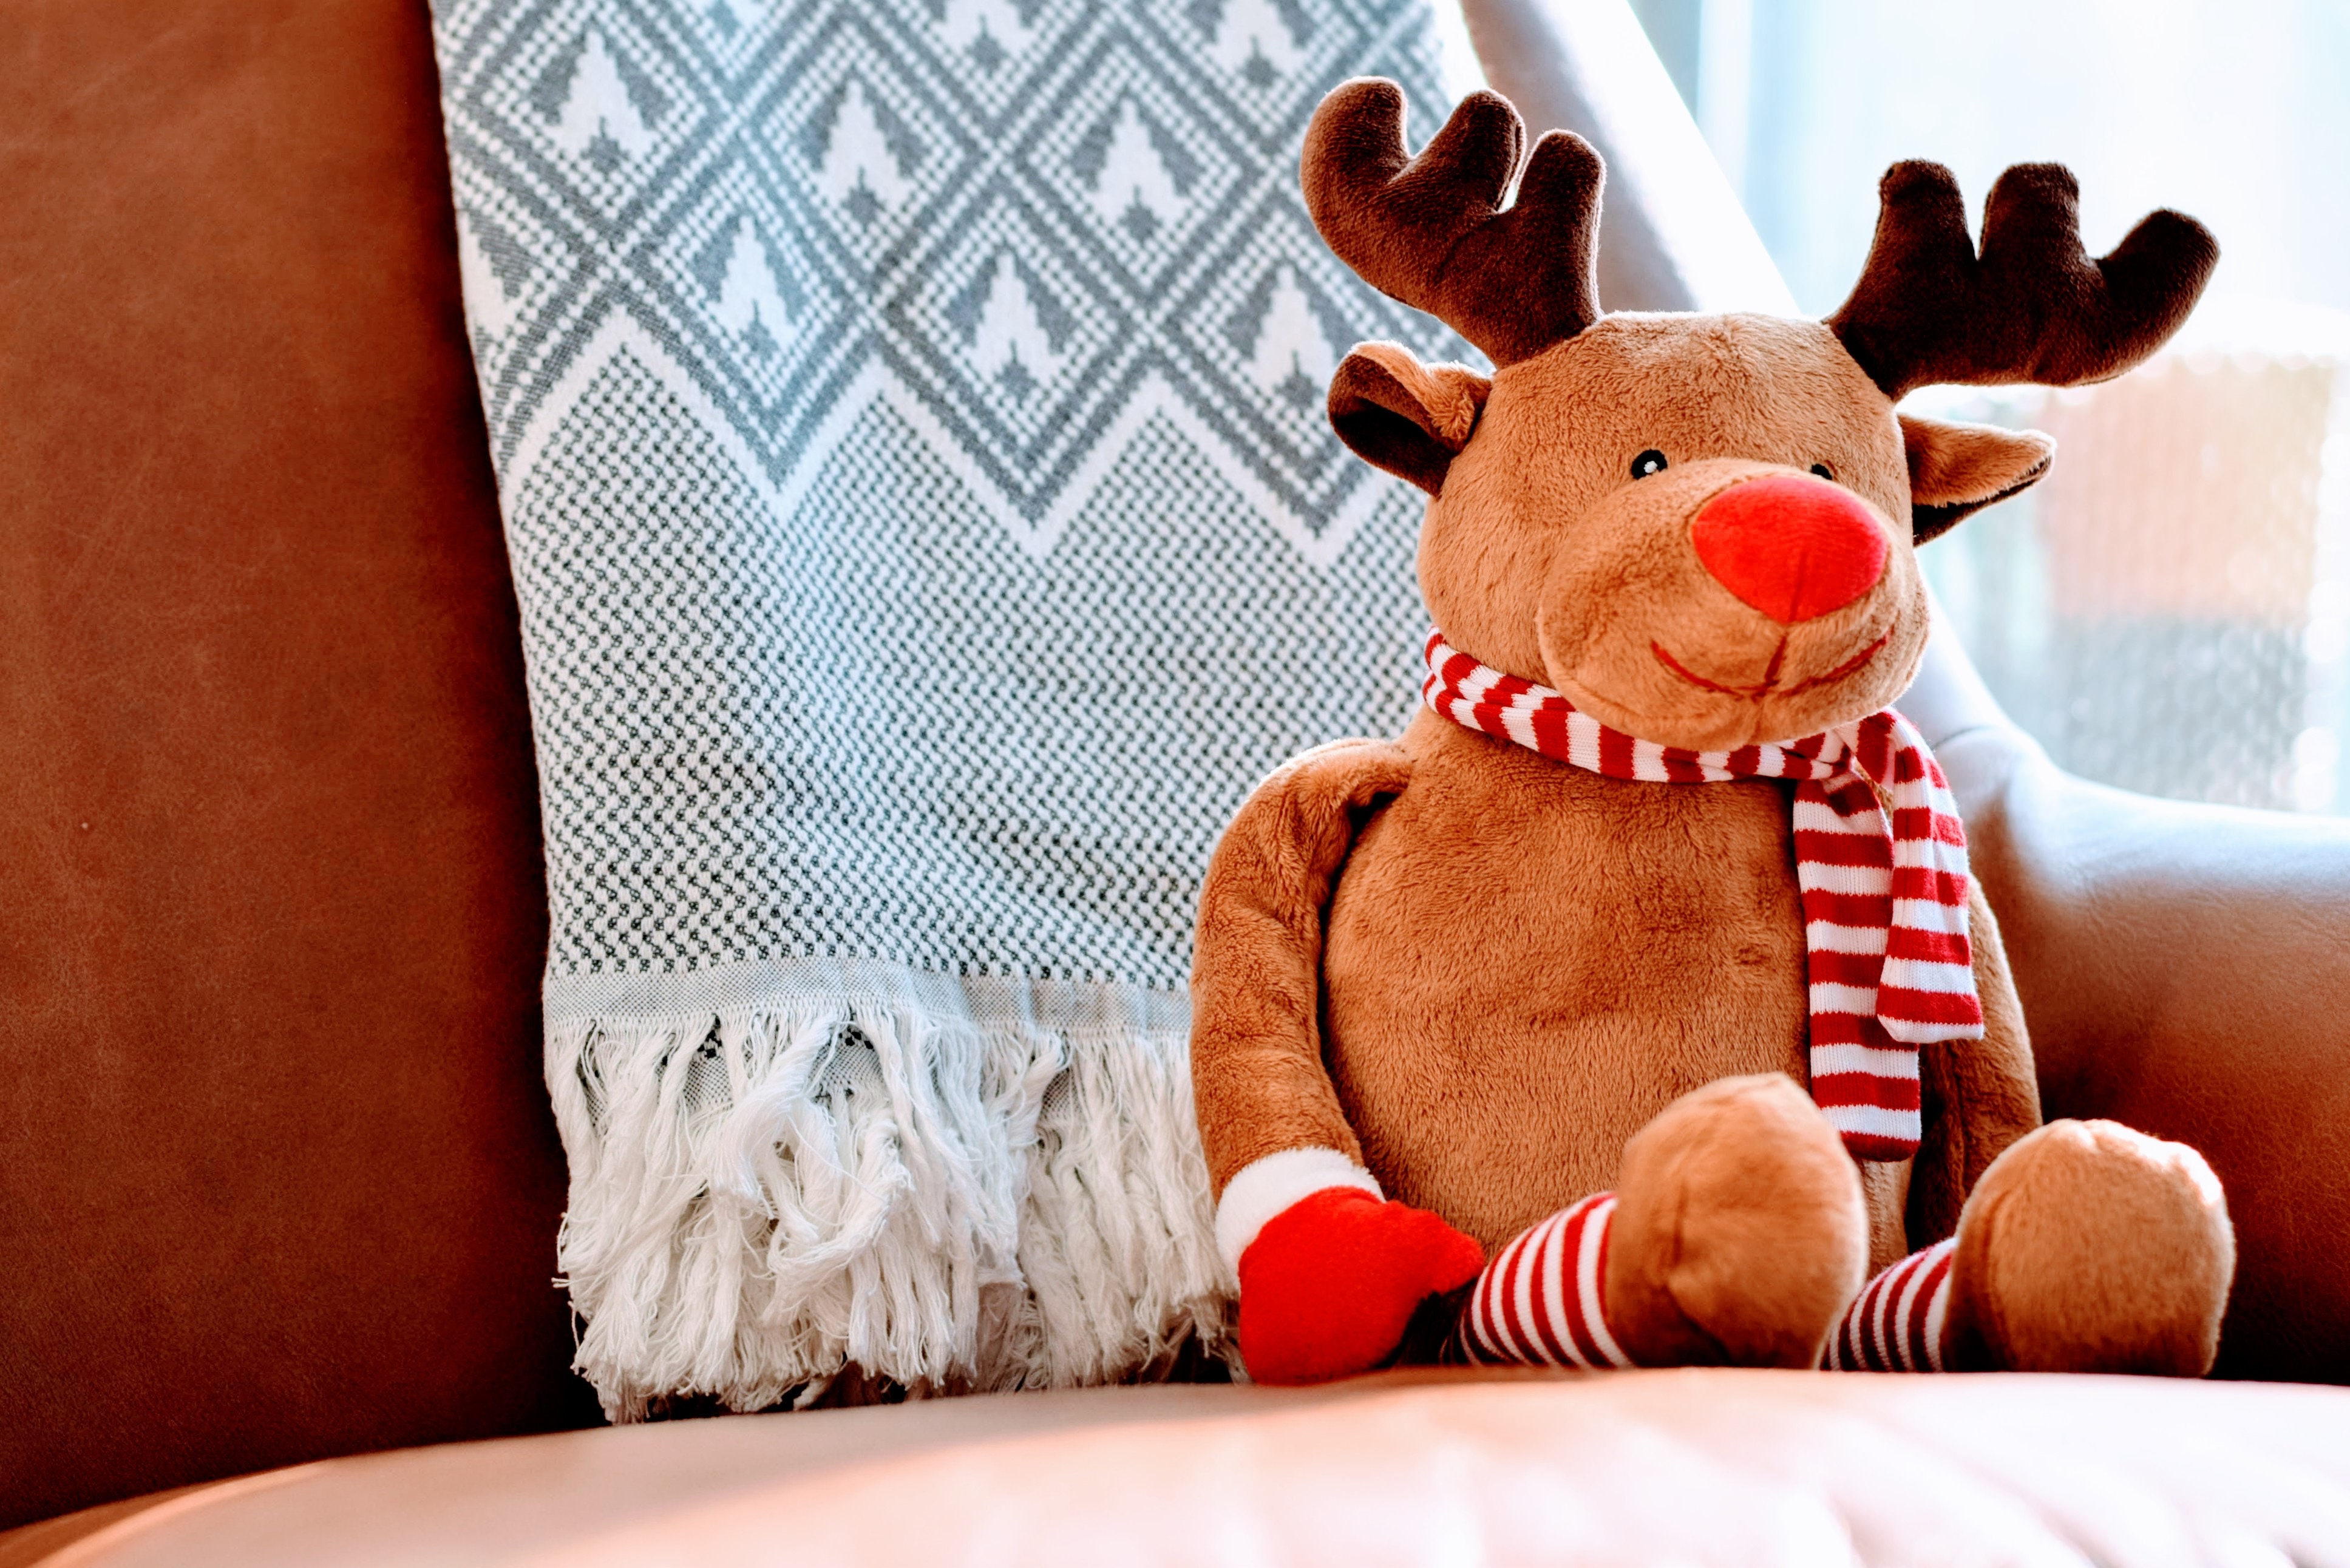 3871x2583 #sofa, #wallpaper, #december, #xma, #christmas, #cute, #blanket, #animal, #scarf, #teddy, #armchair, #Public domain image, #toy, #chair, #reindeer, #couch, #christmas background, #holiday, #christmas wallpaper, #rudolph, #stuffed